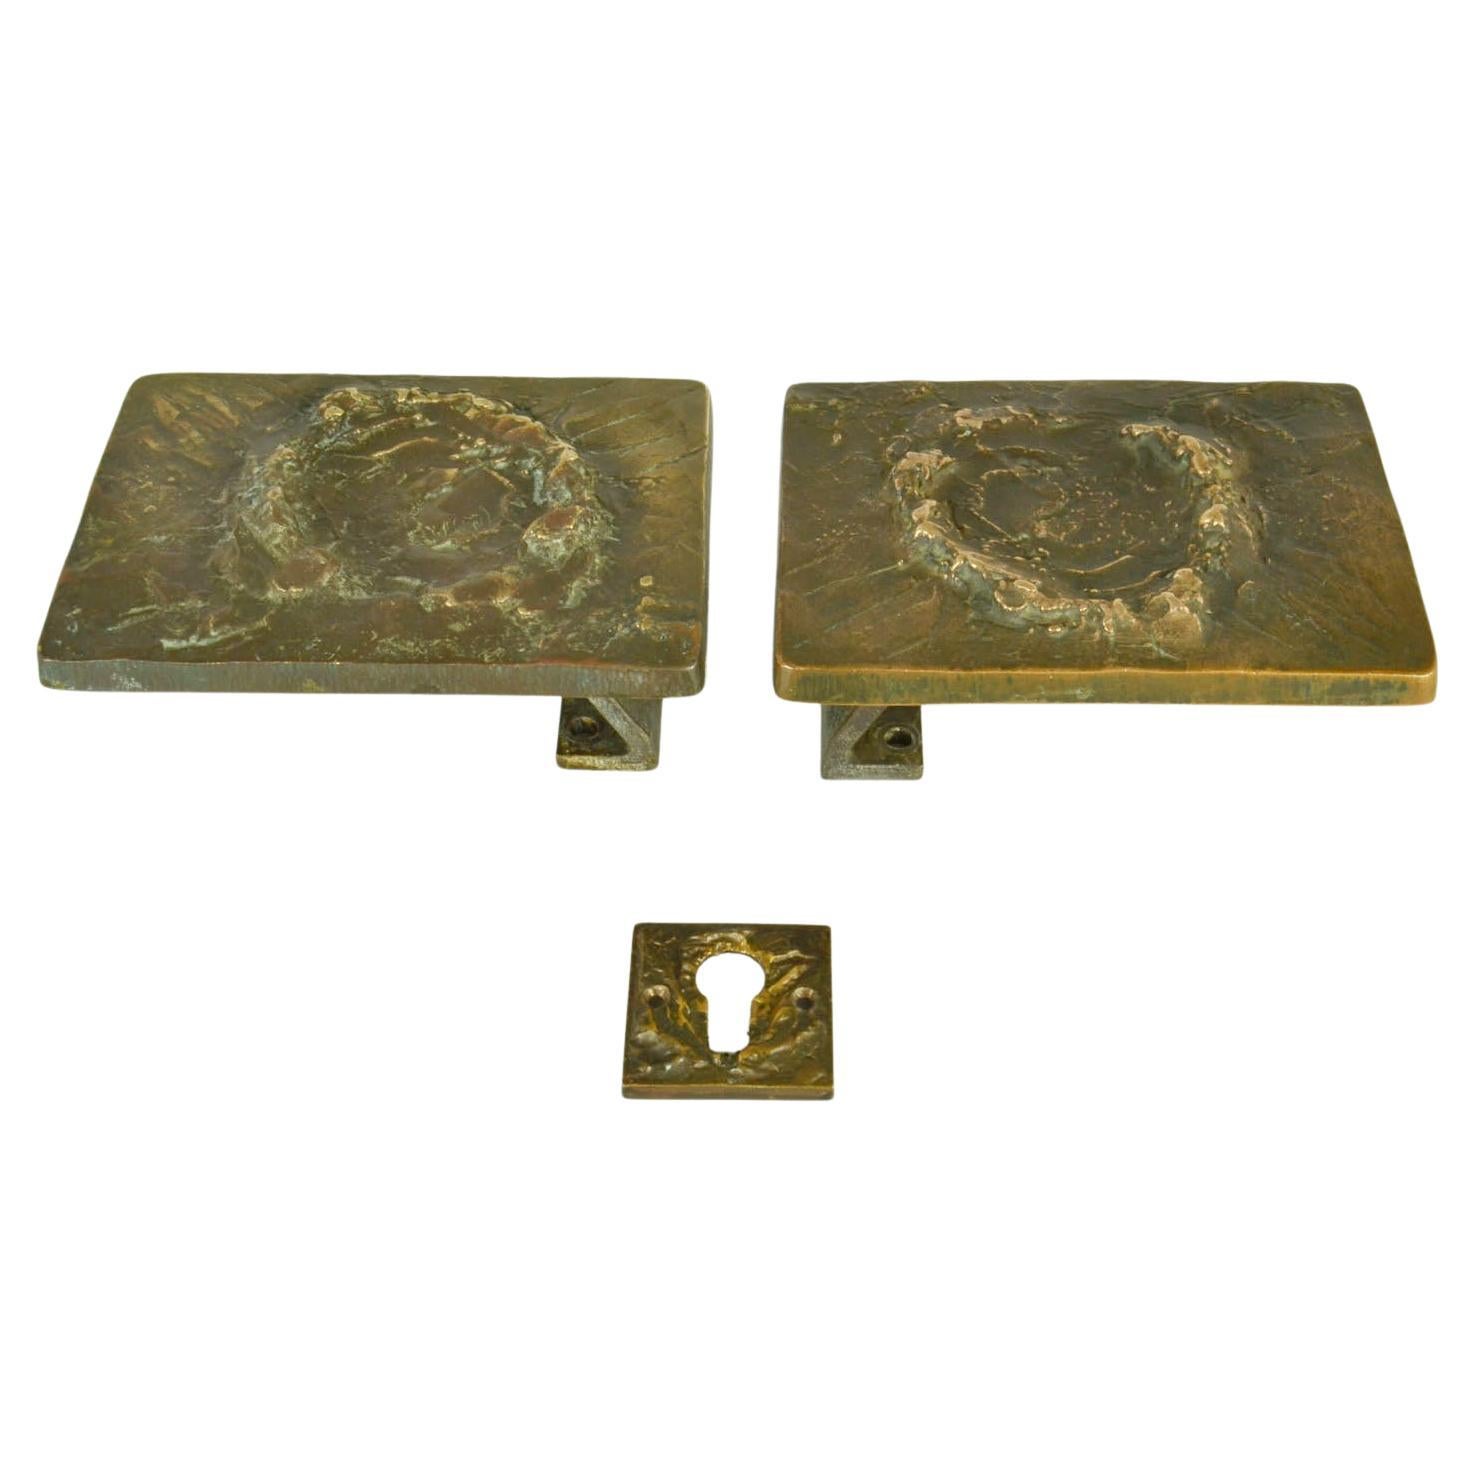 Architectural Pair of Push Pull Relief Door Handles in Bronze with Keyhole